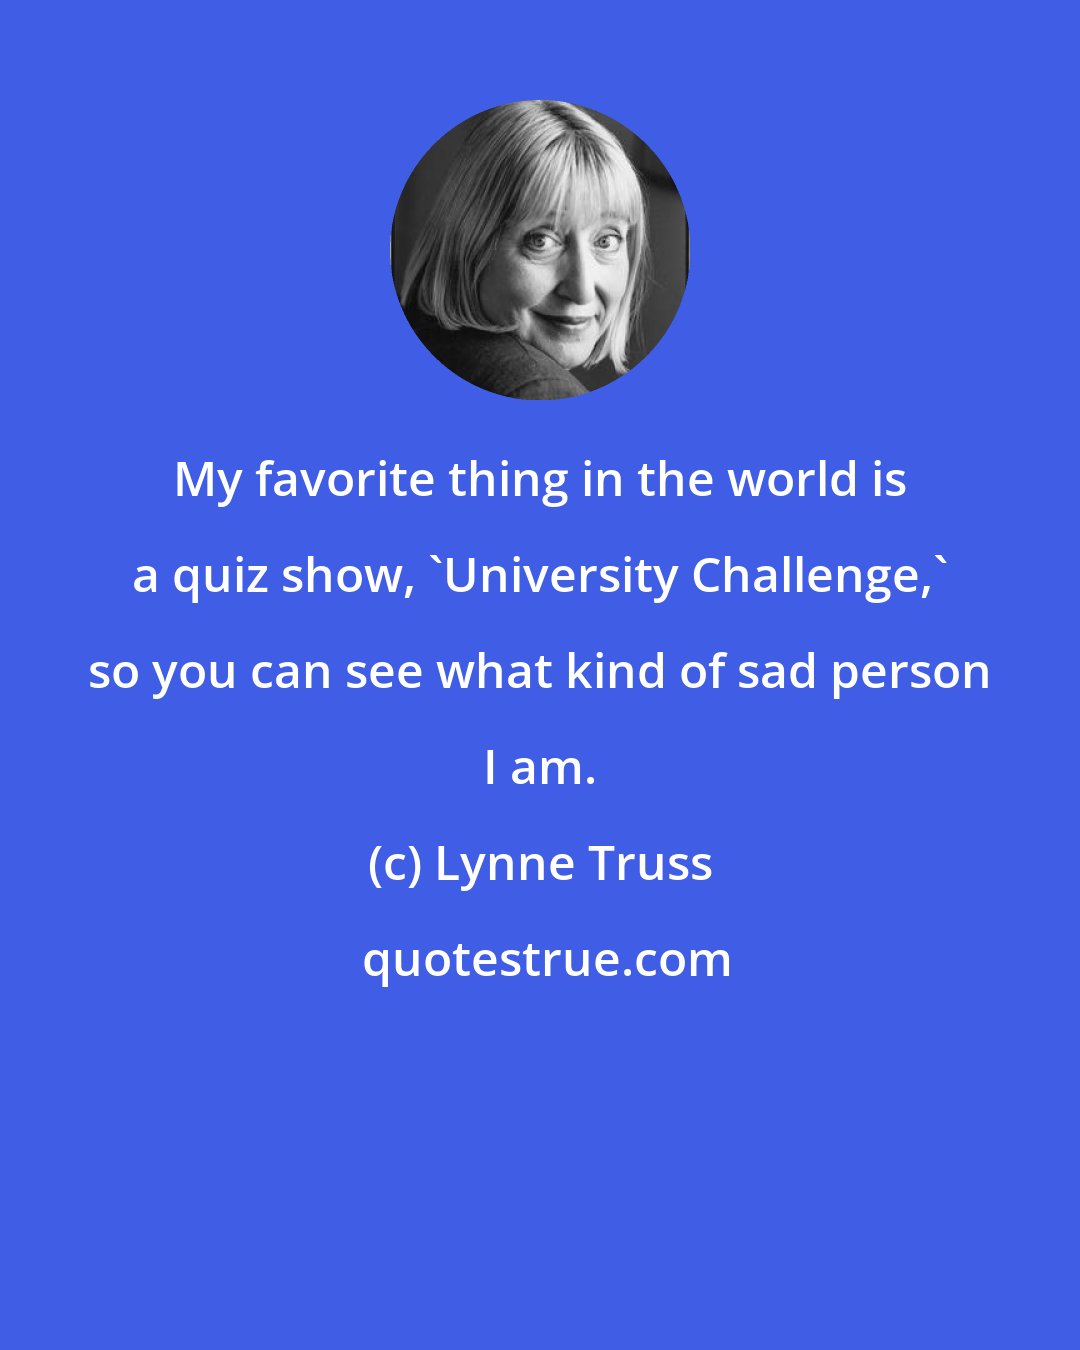 Lynne Truss: My favorite thing in the world is a quiz show, 'University Challenge,' so you can see what kind of sad person I am.